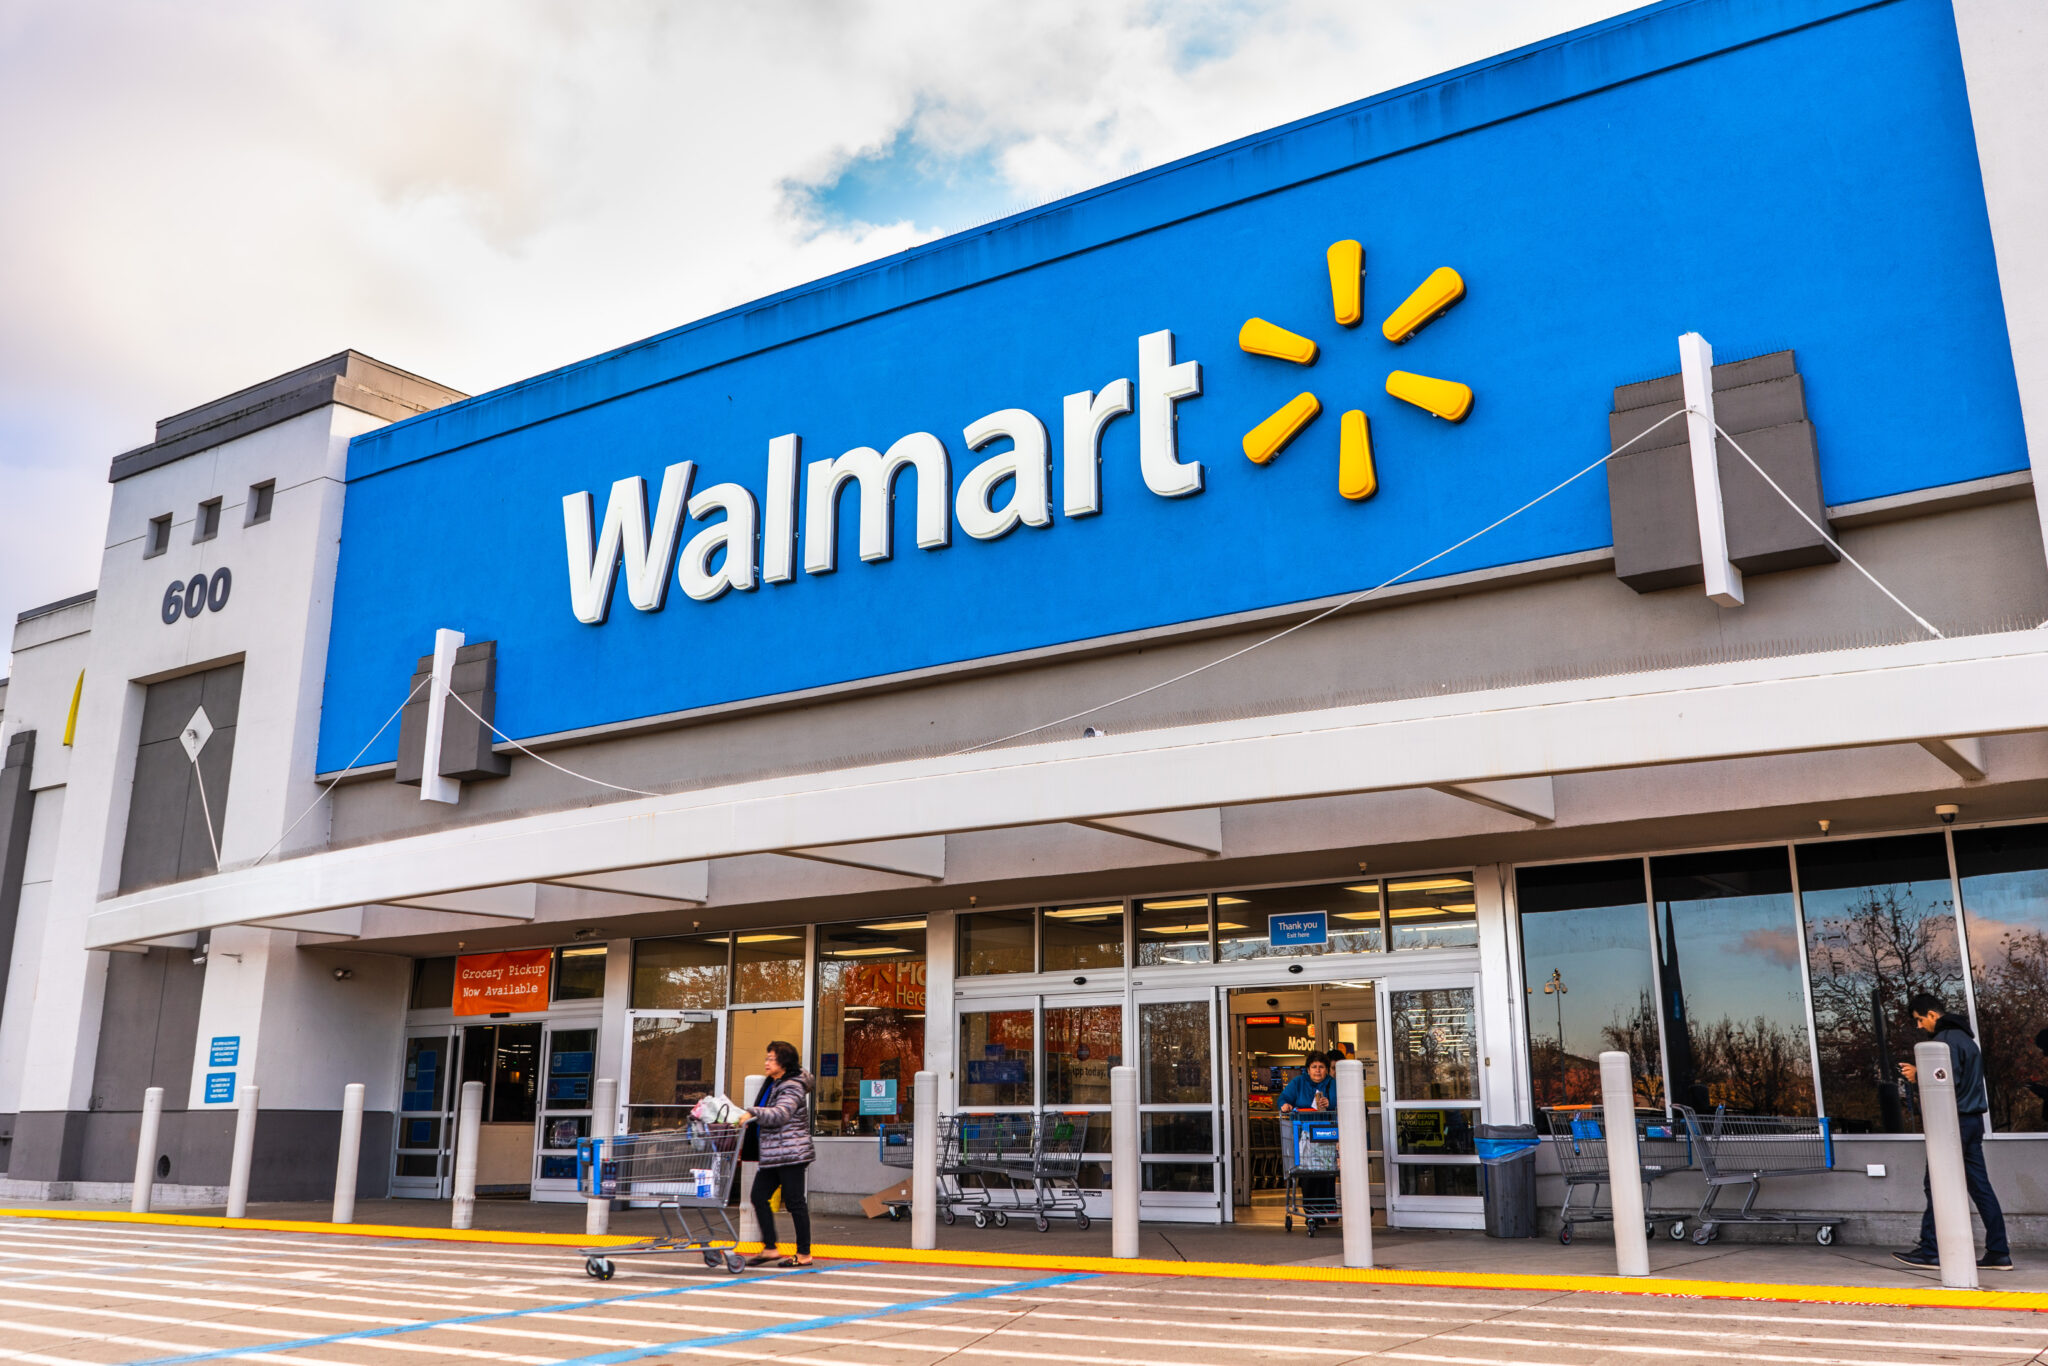 Walmarts across the country have made several changes regarding its checkout